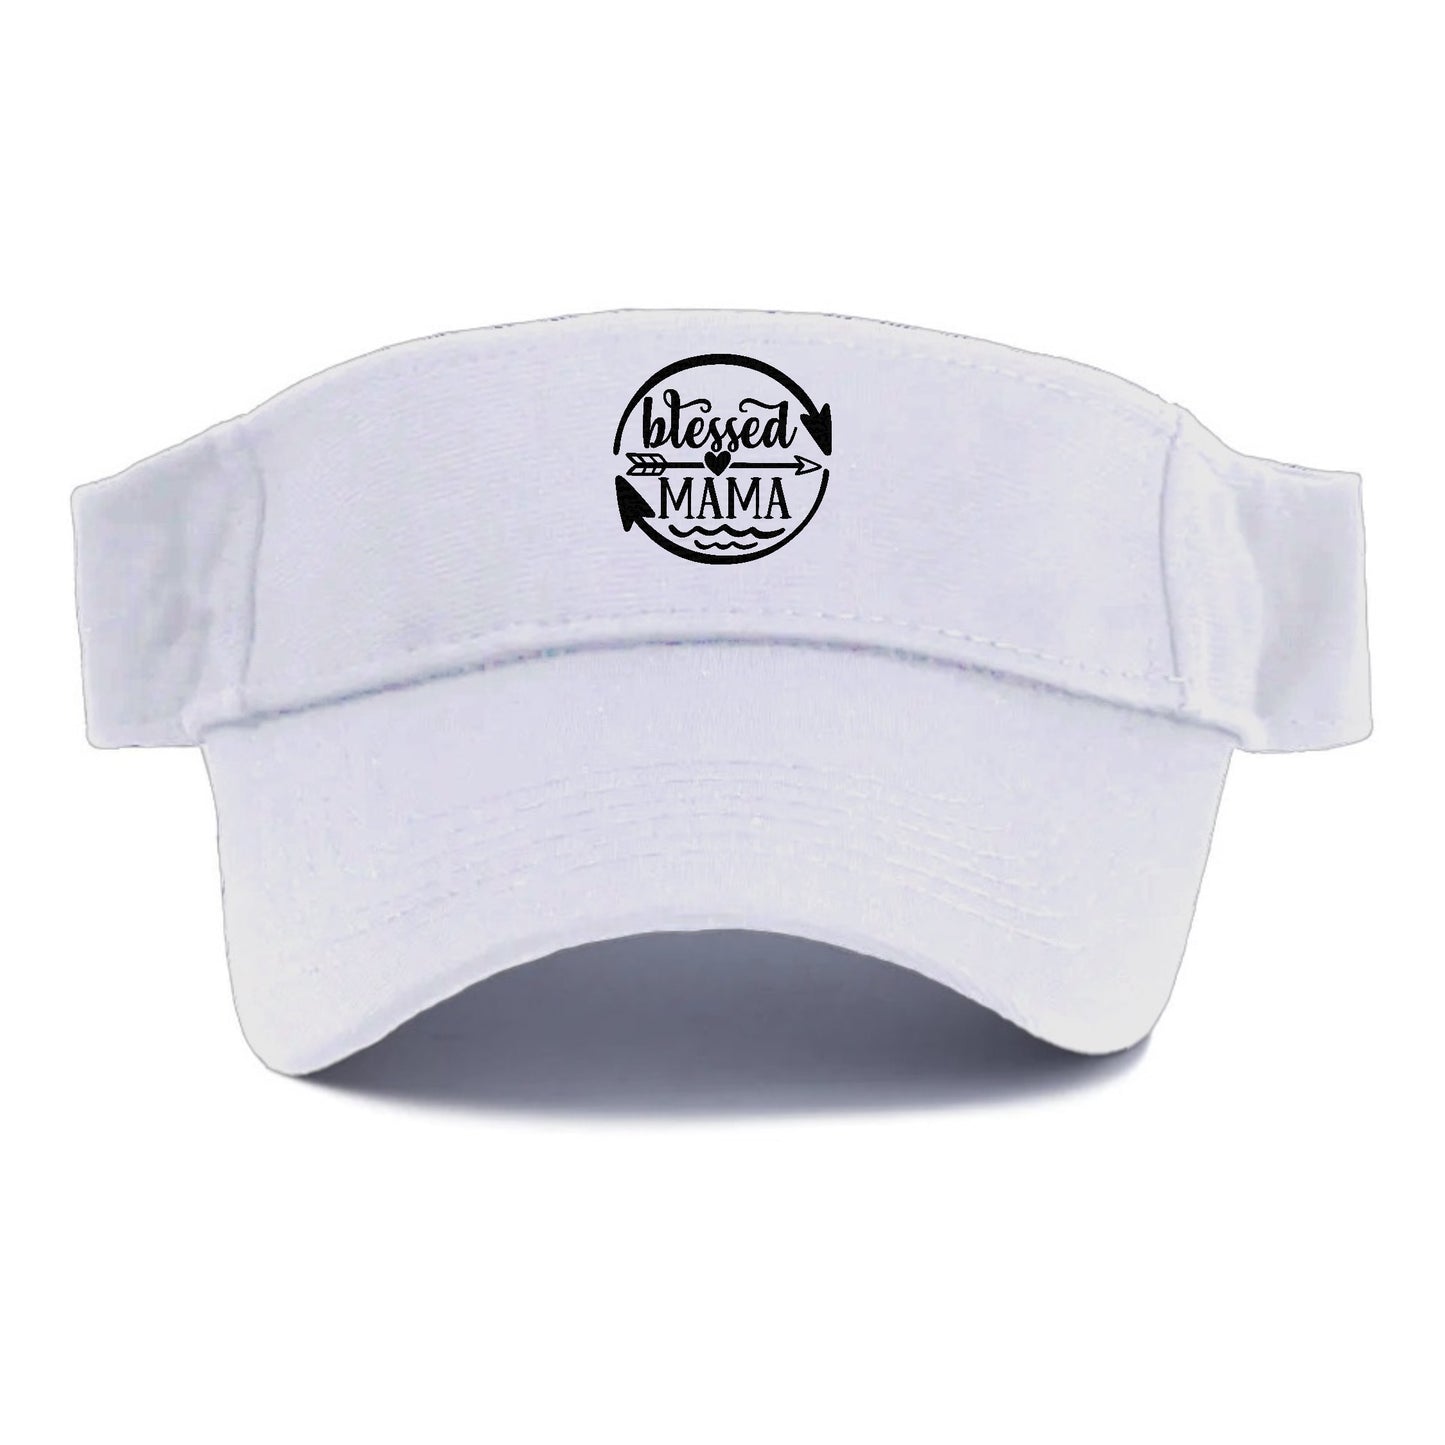 Blessed mama Hat